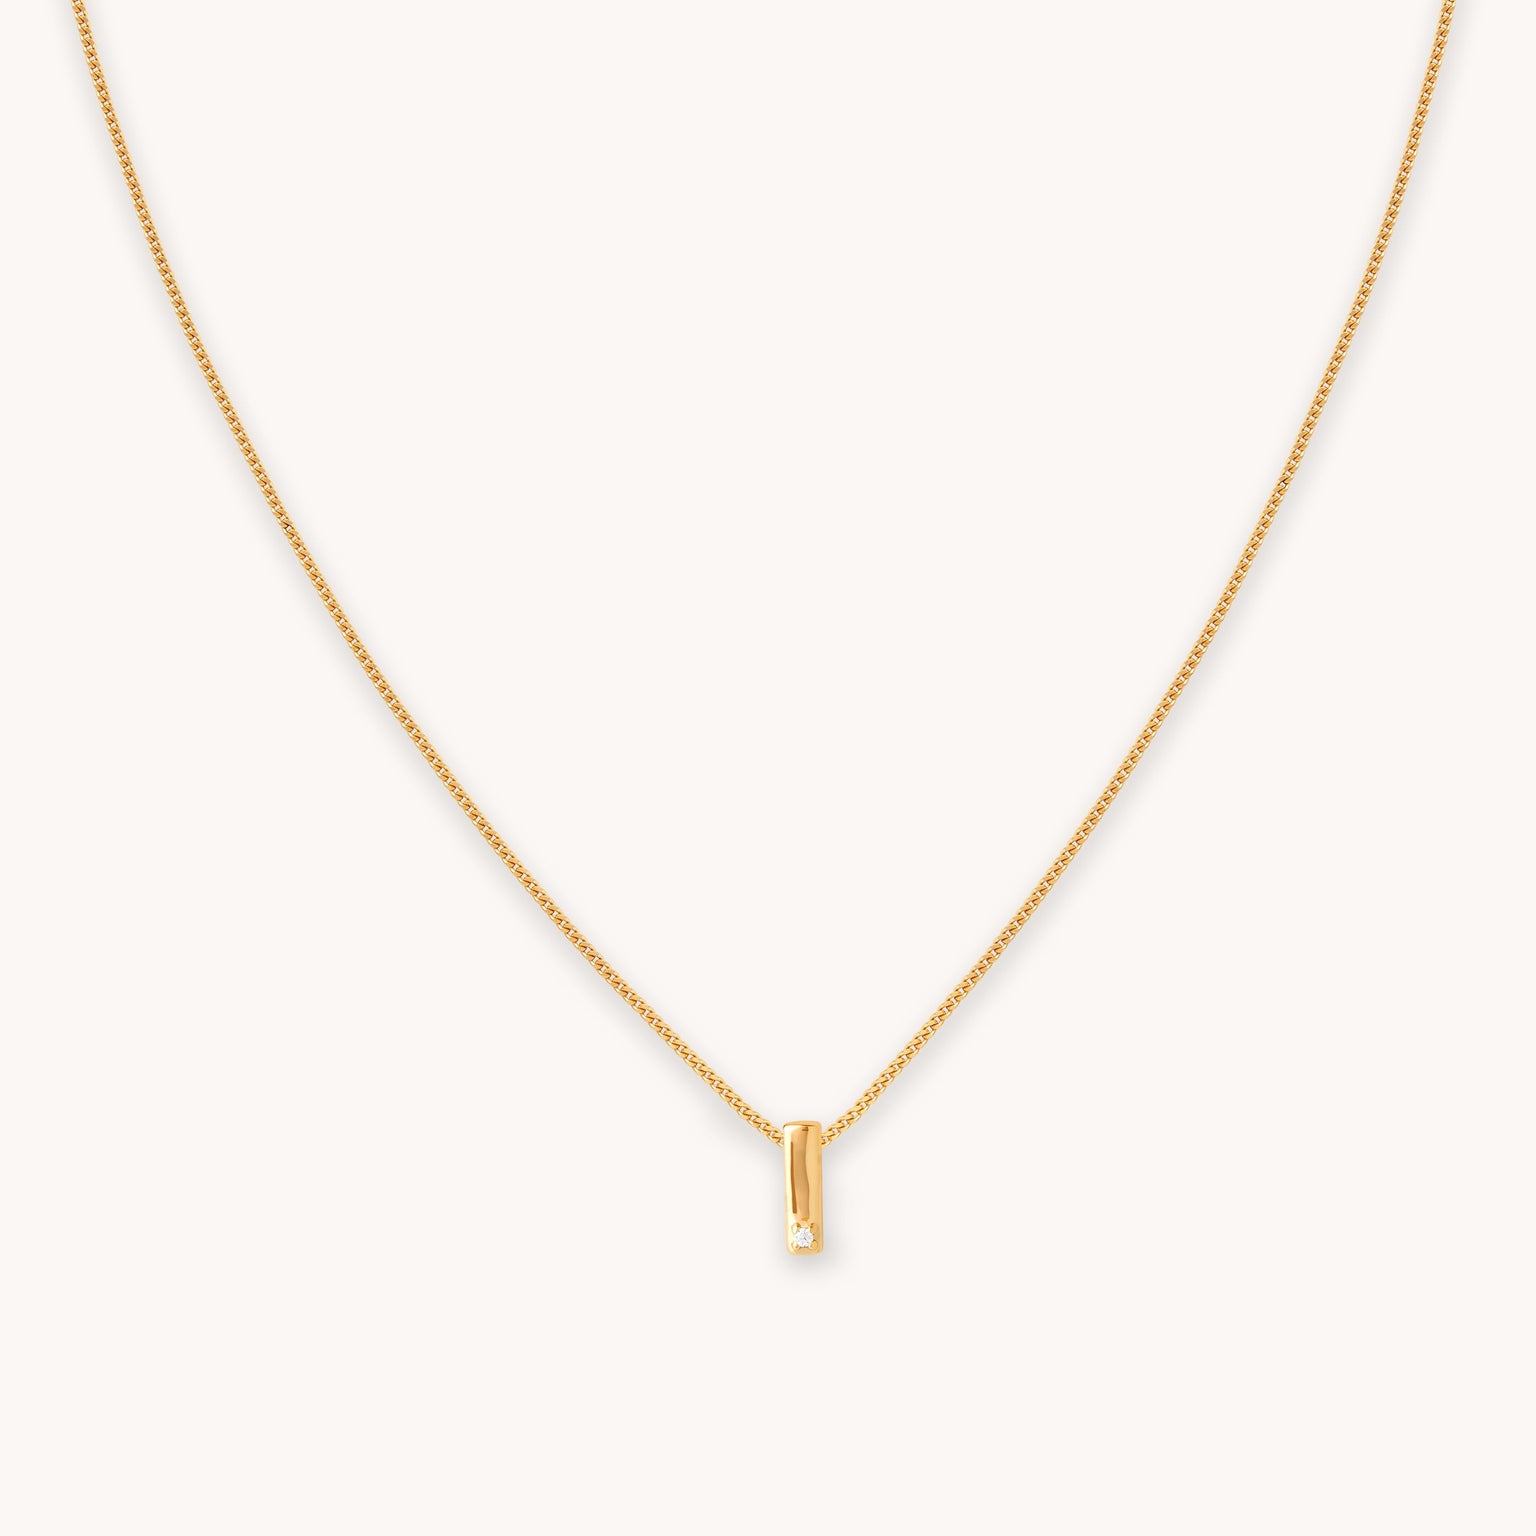 I Initial Pendant Necklace in Gold